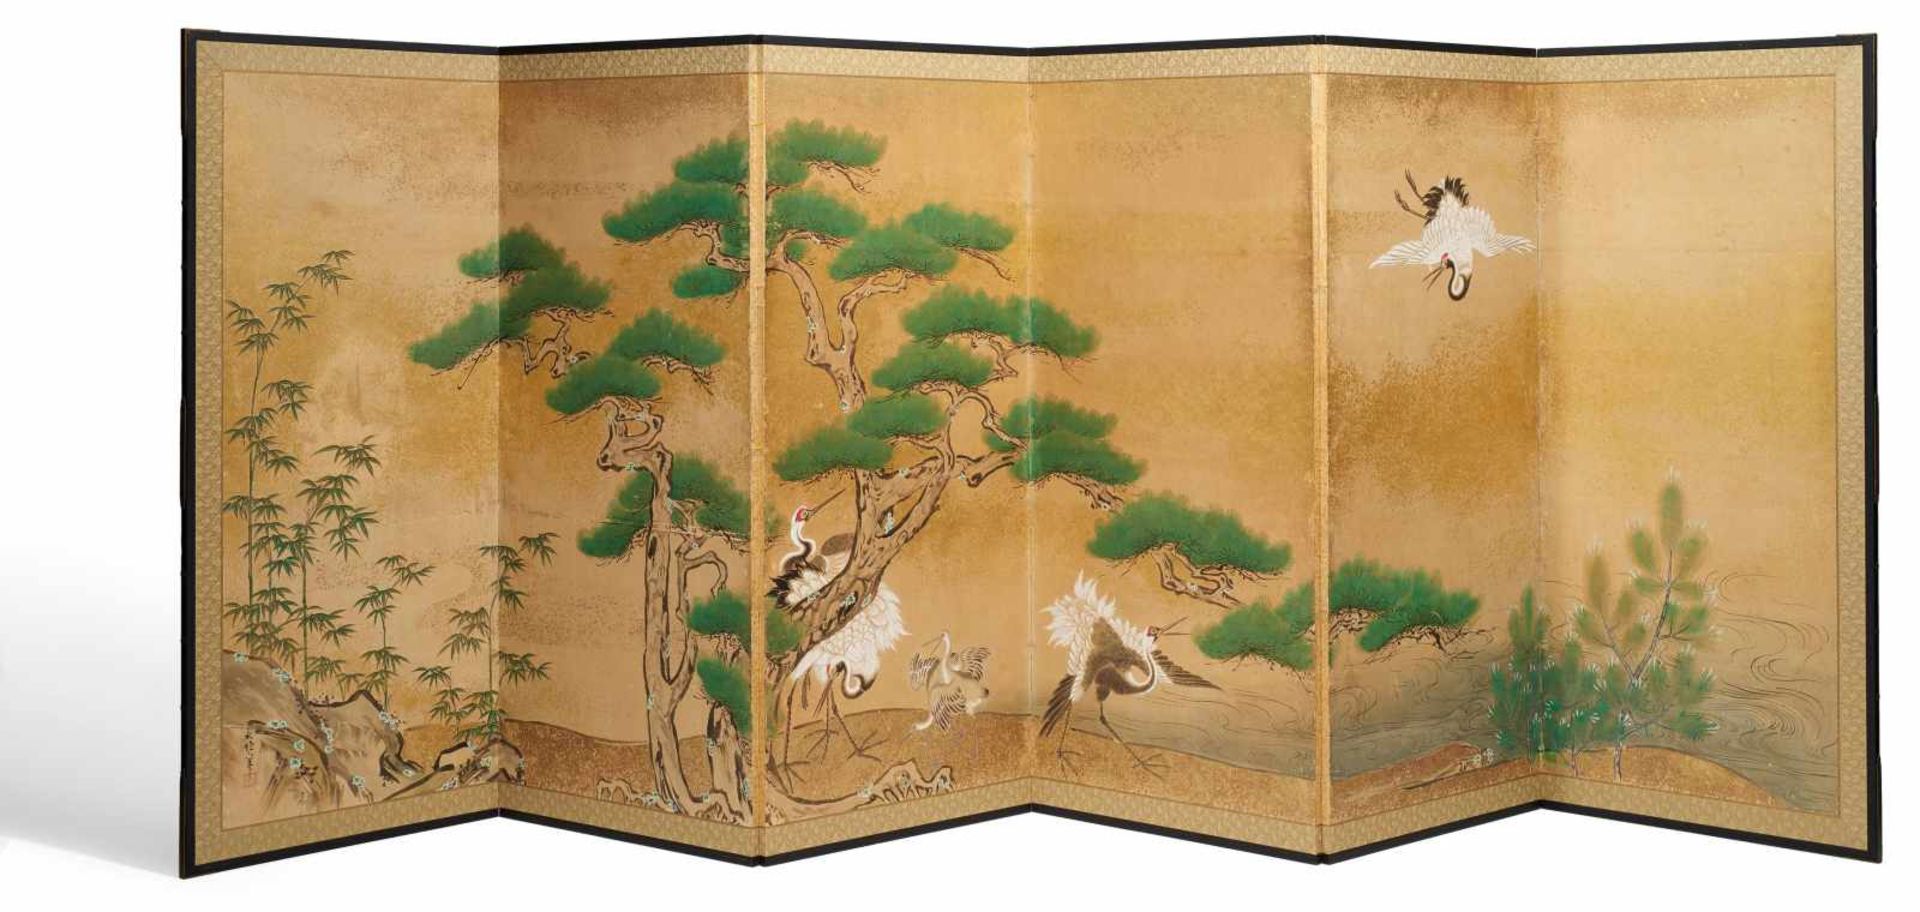 SCREEN (BYÔBU) WITH CRANES, PINES AND BAMBOO. Japan. Edo period (1603-1868). Pigments, shell lime (